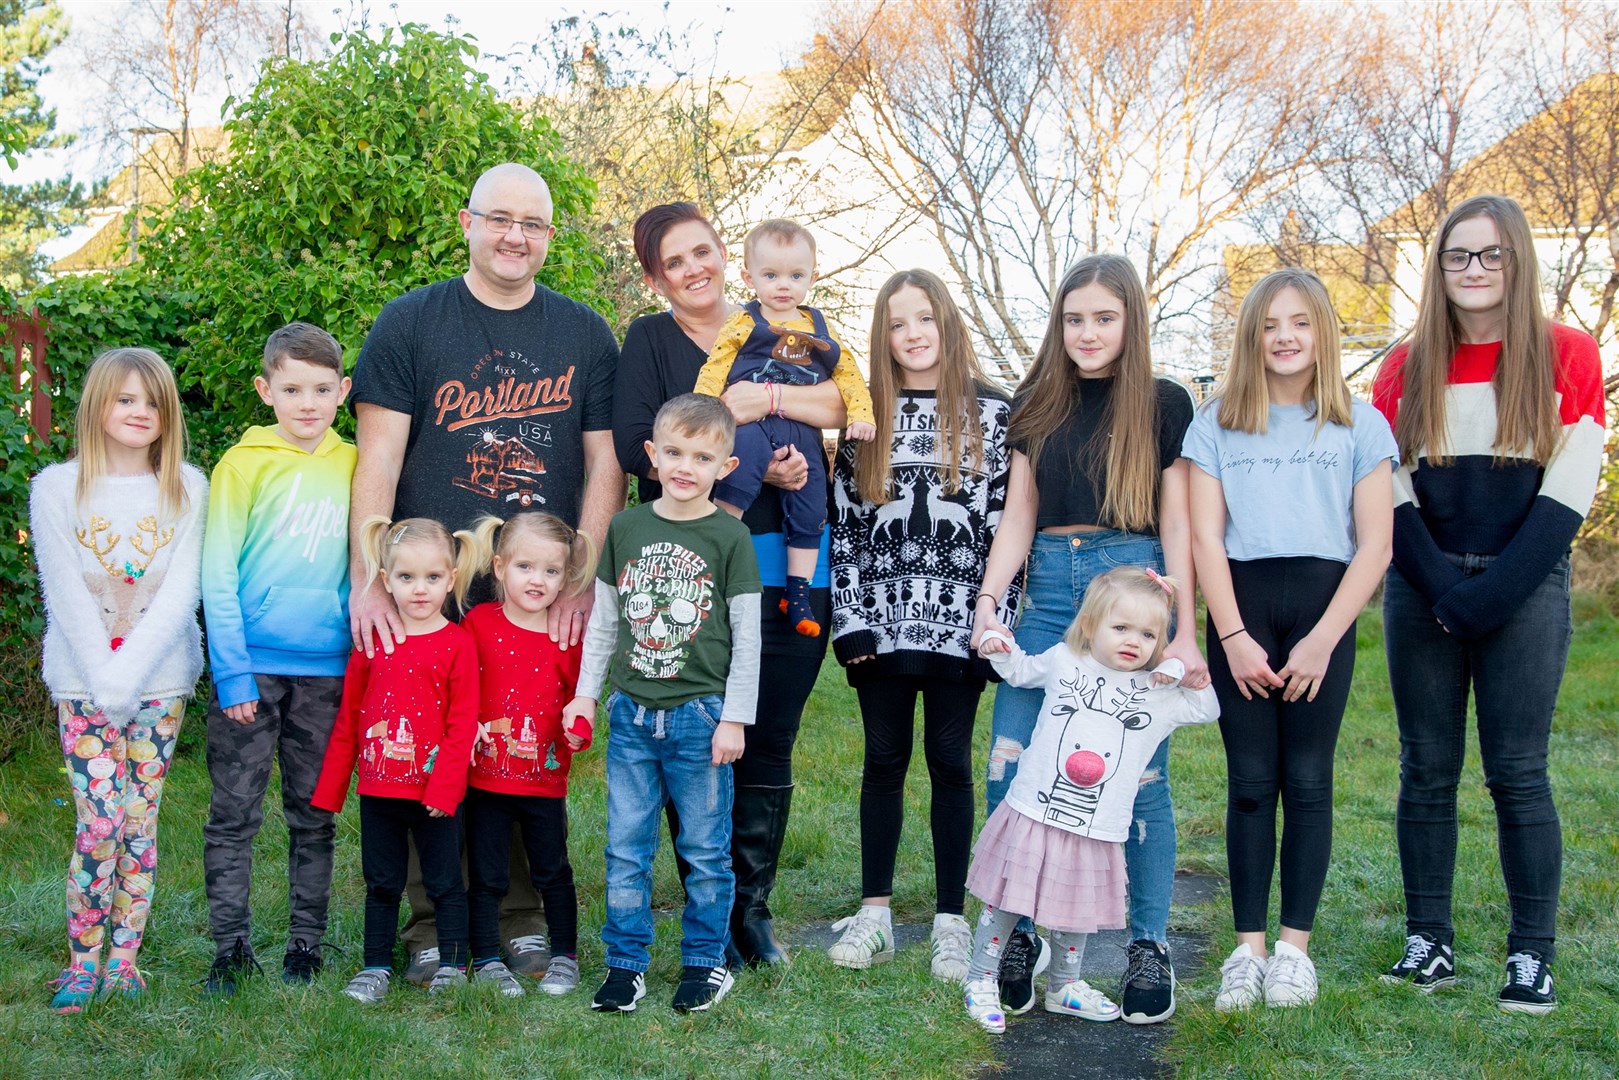 Sullivan family of 13 from Moray film another video: It's a lockdown life!